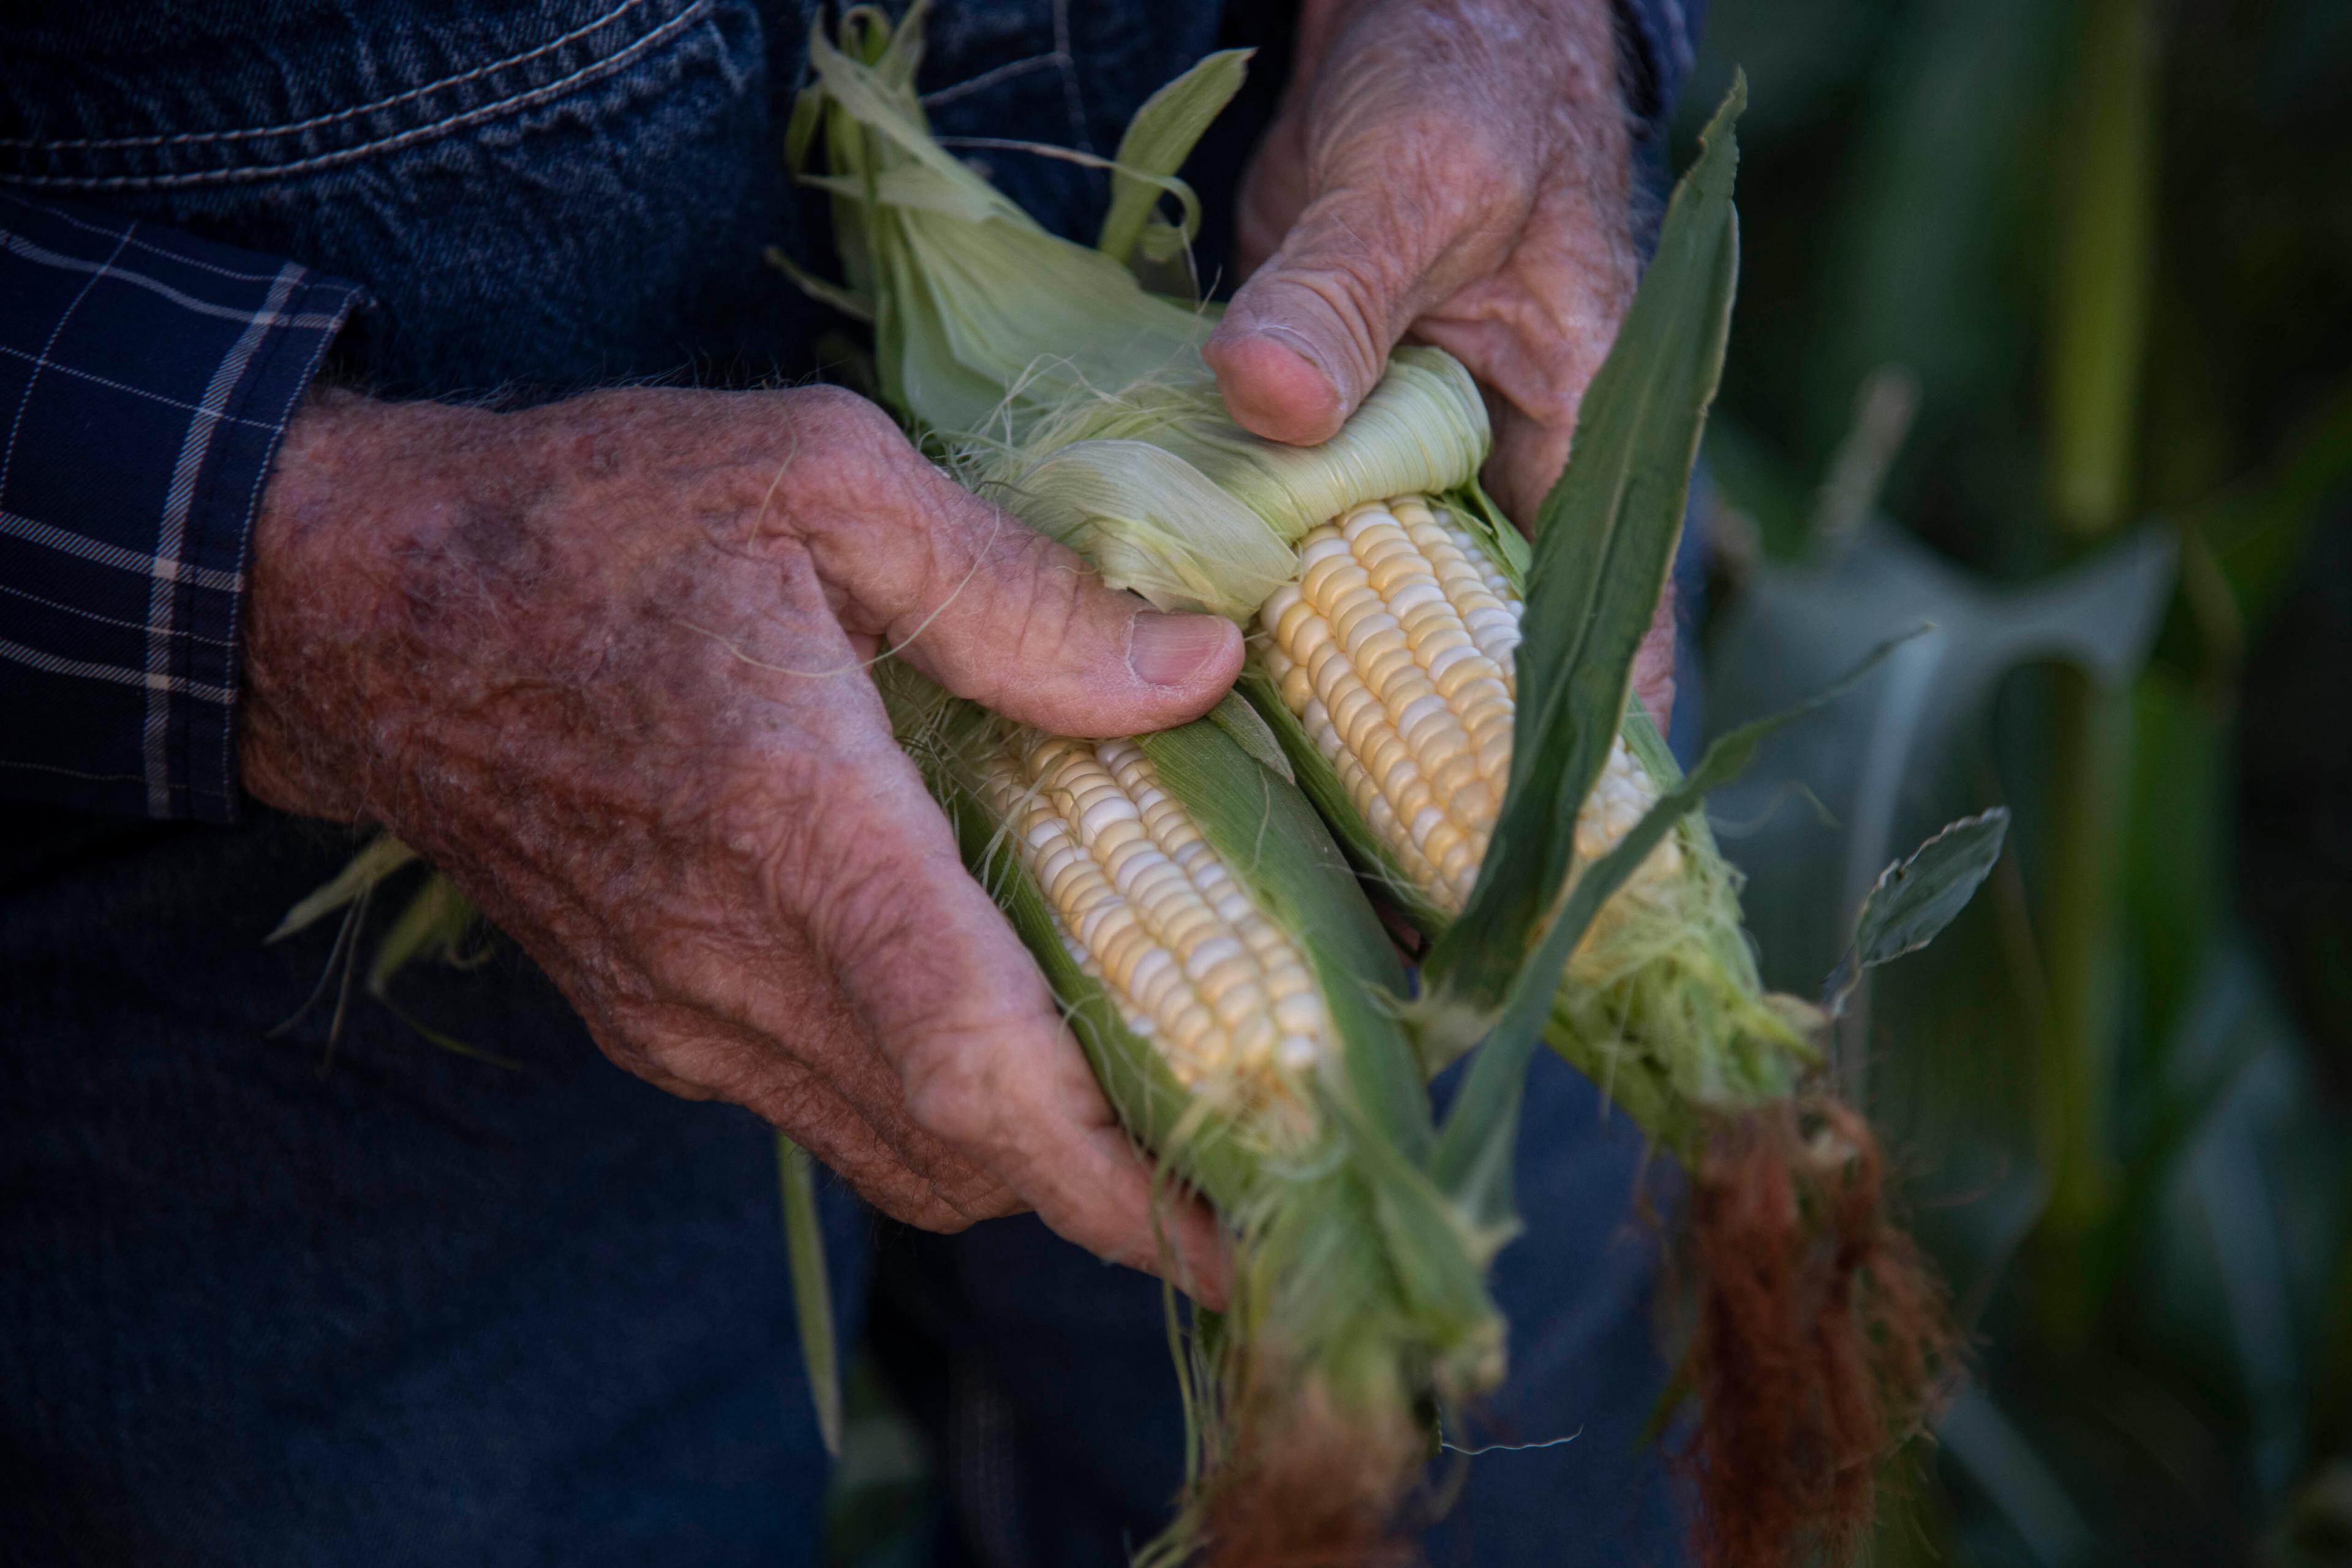 A farmer holds two ears of corn in his hands.